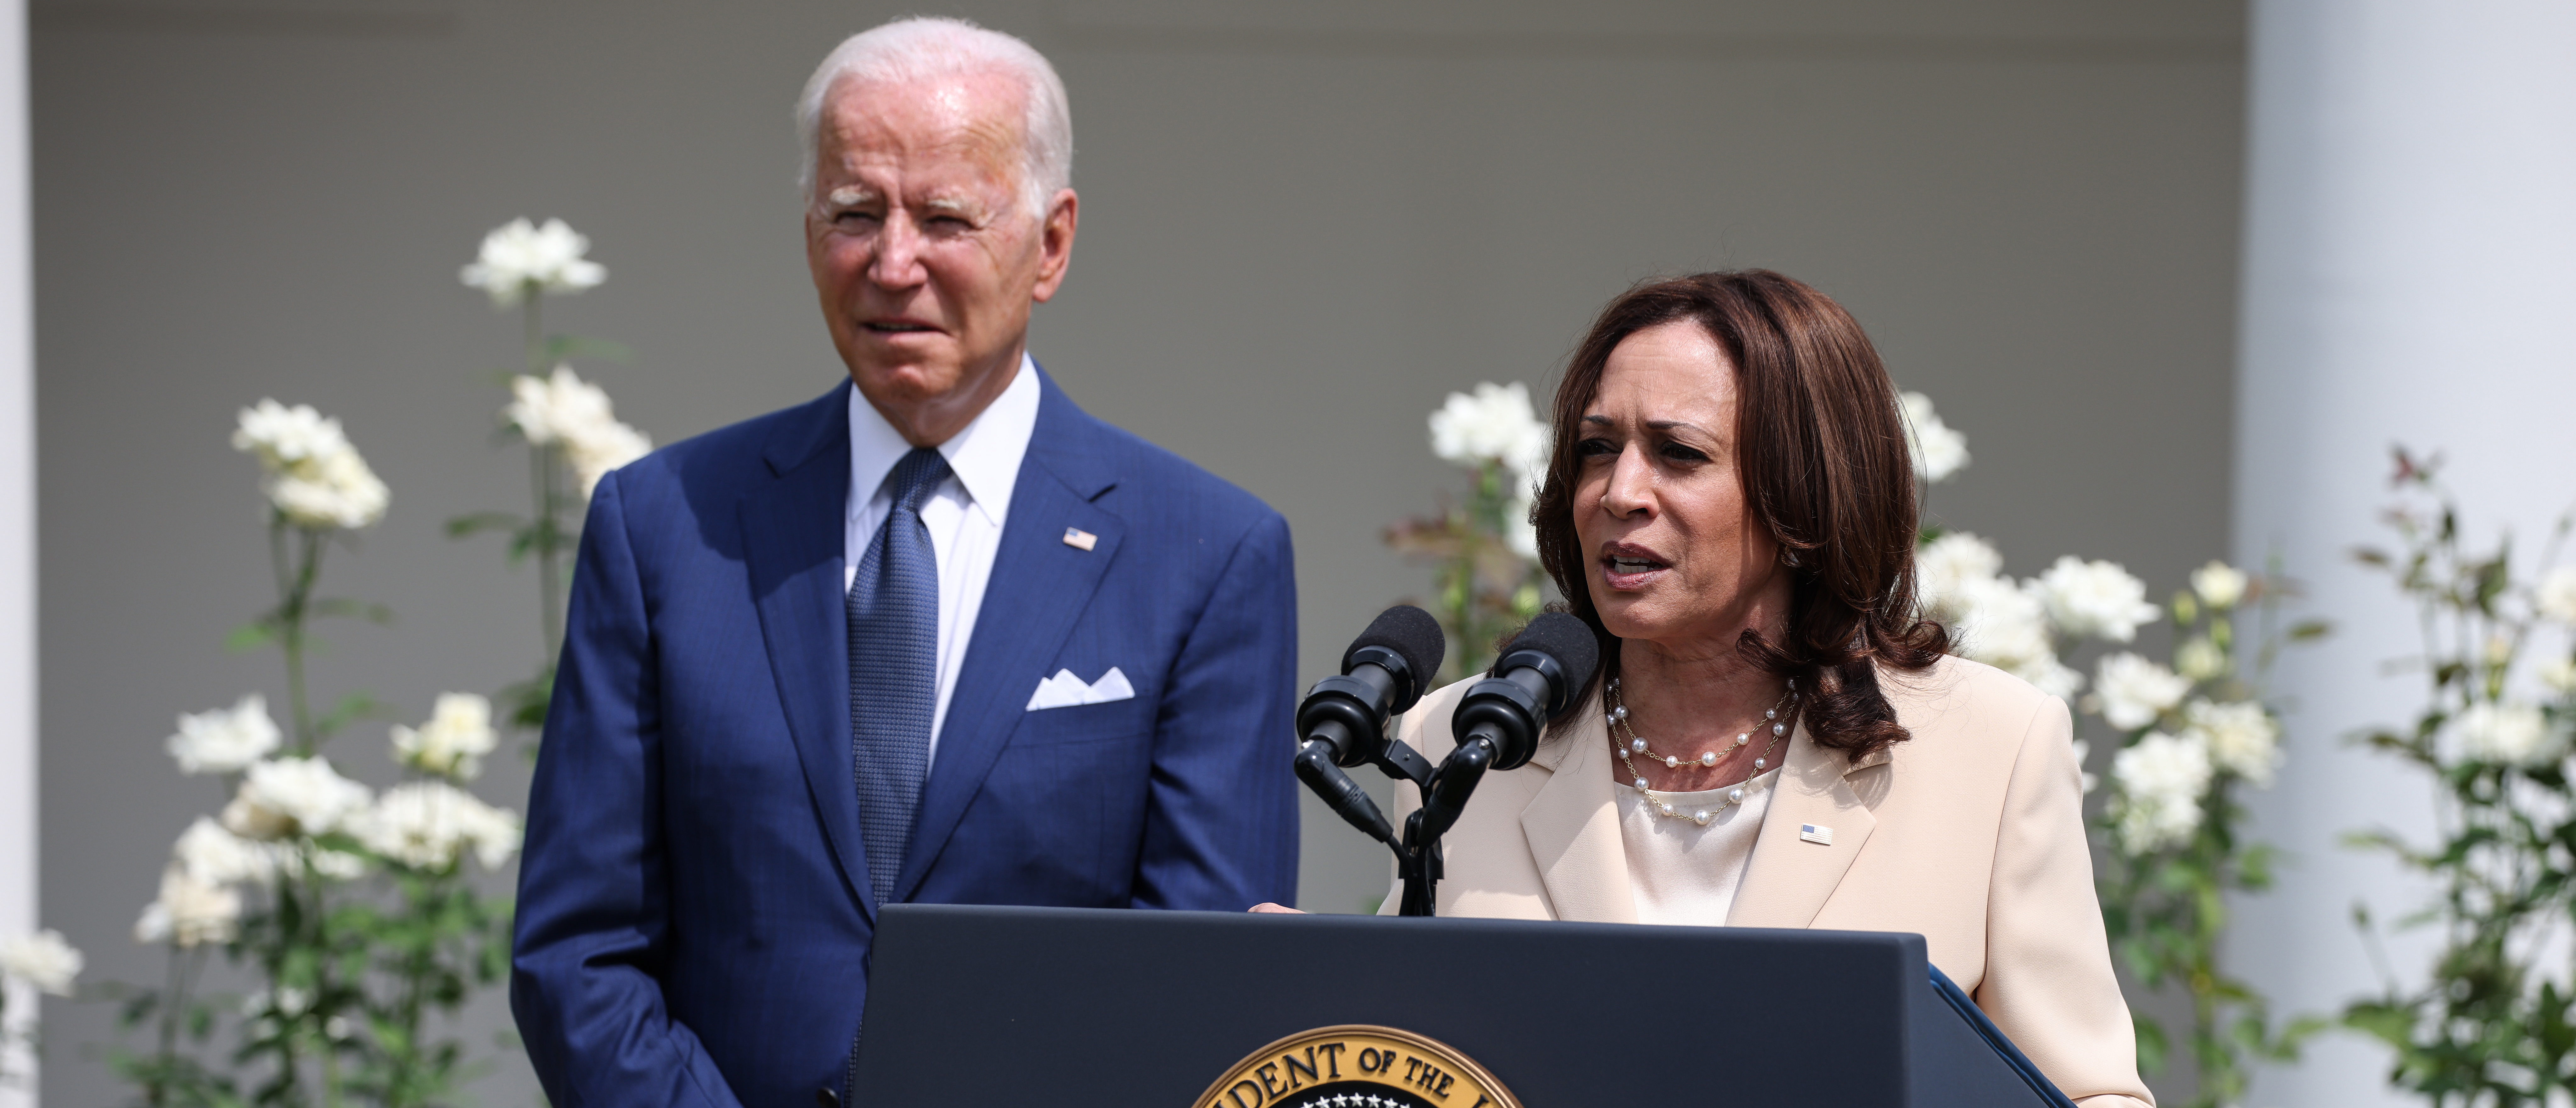 WASHINGTON, DC - JULY 26: U.S. Vice President Kamala Harris delivers remarks, as U.S. President Joe Biden looks on, in the Rose Garden of the White House on July 26, 2021 in Washington, DC. The event was to mark the 31st anniversary of the Americans with Disabilities Act (ADA) being signed into law. (Photo by Anna Moneymaker/Getty Images)